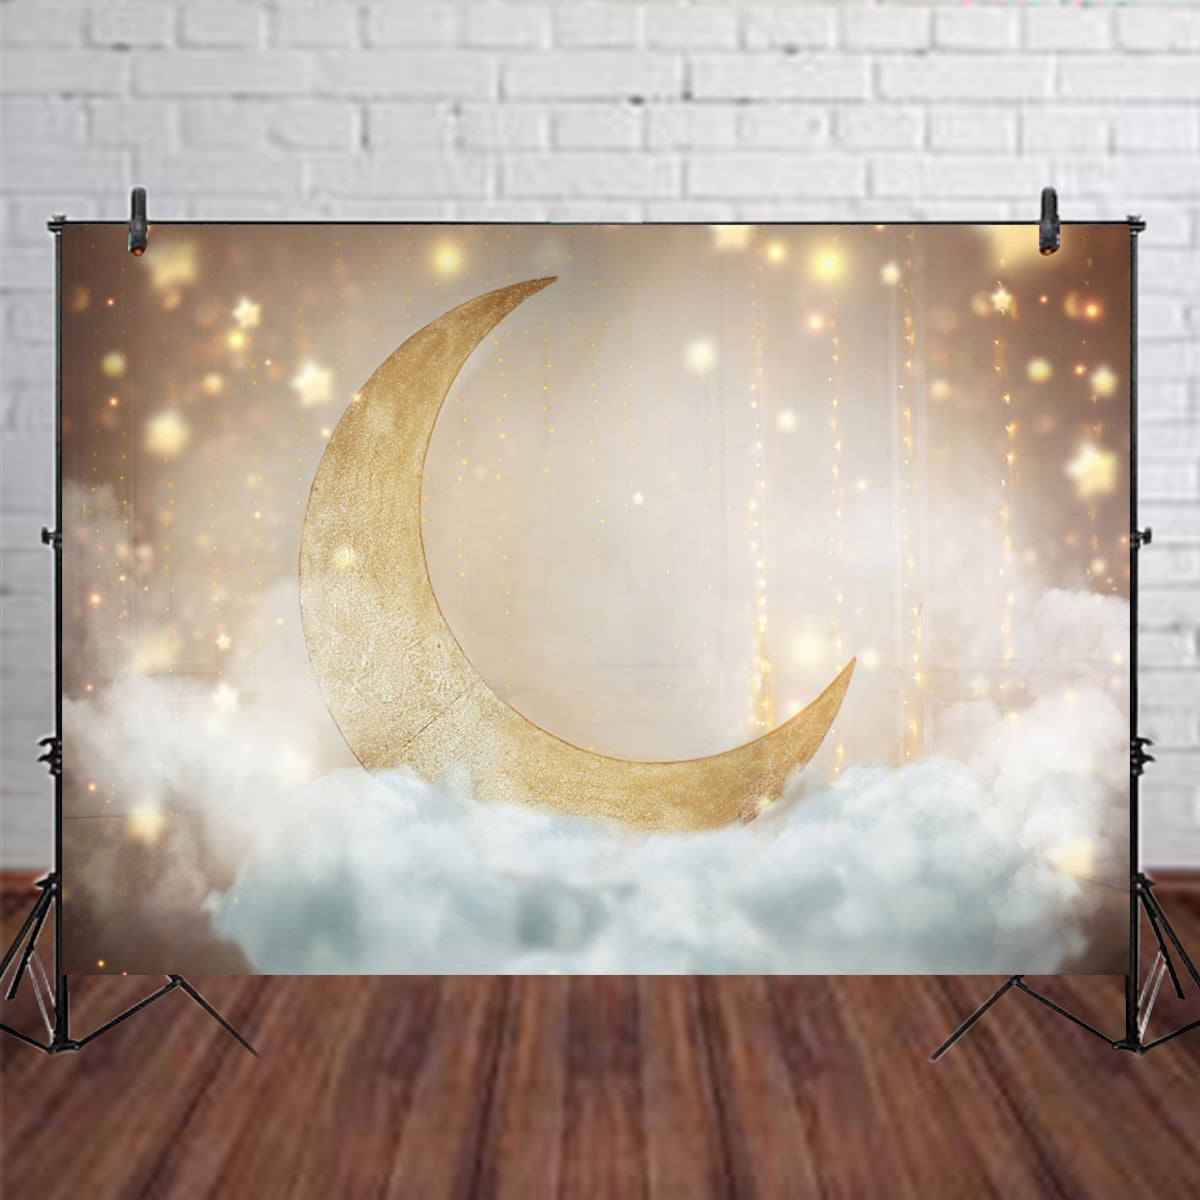 Twinkle Twinkle Little Star Backdrop 7x5ft Blue Baby Shower Gender Reveal Decoration Calf Elephant Sitting on The Moon Background for Photography Photo Studio Props Vinyl